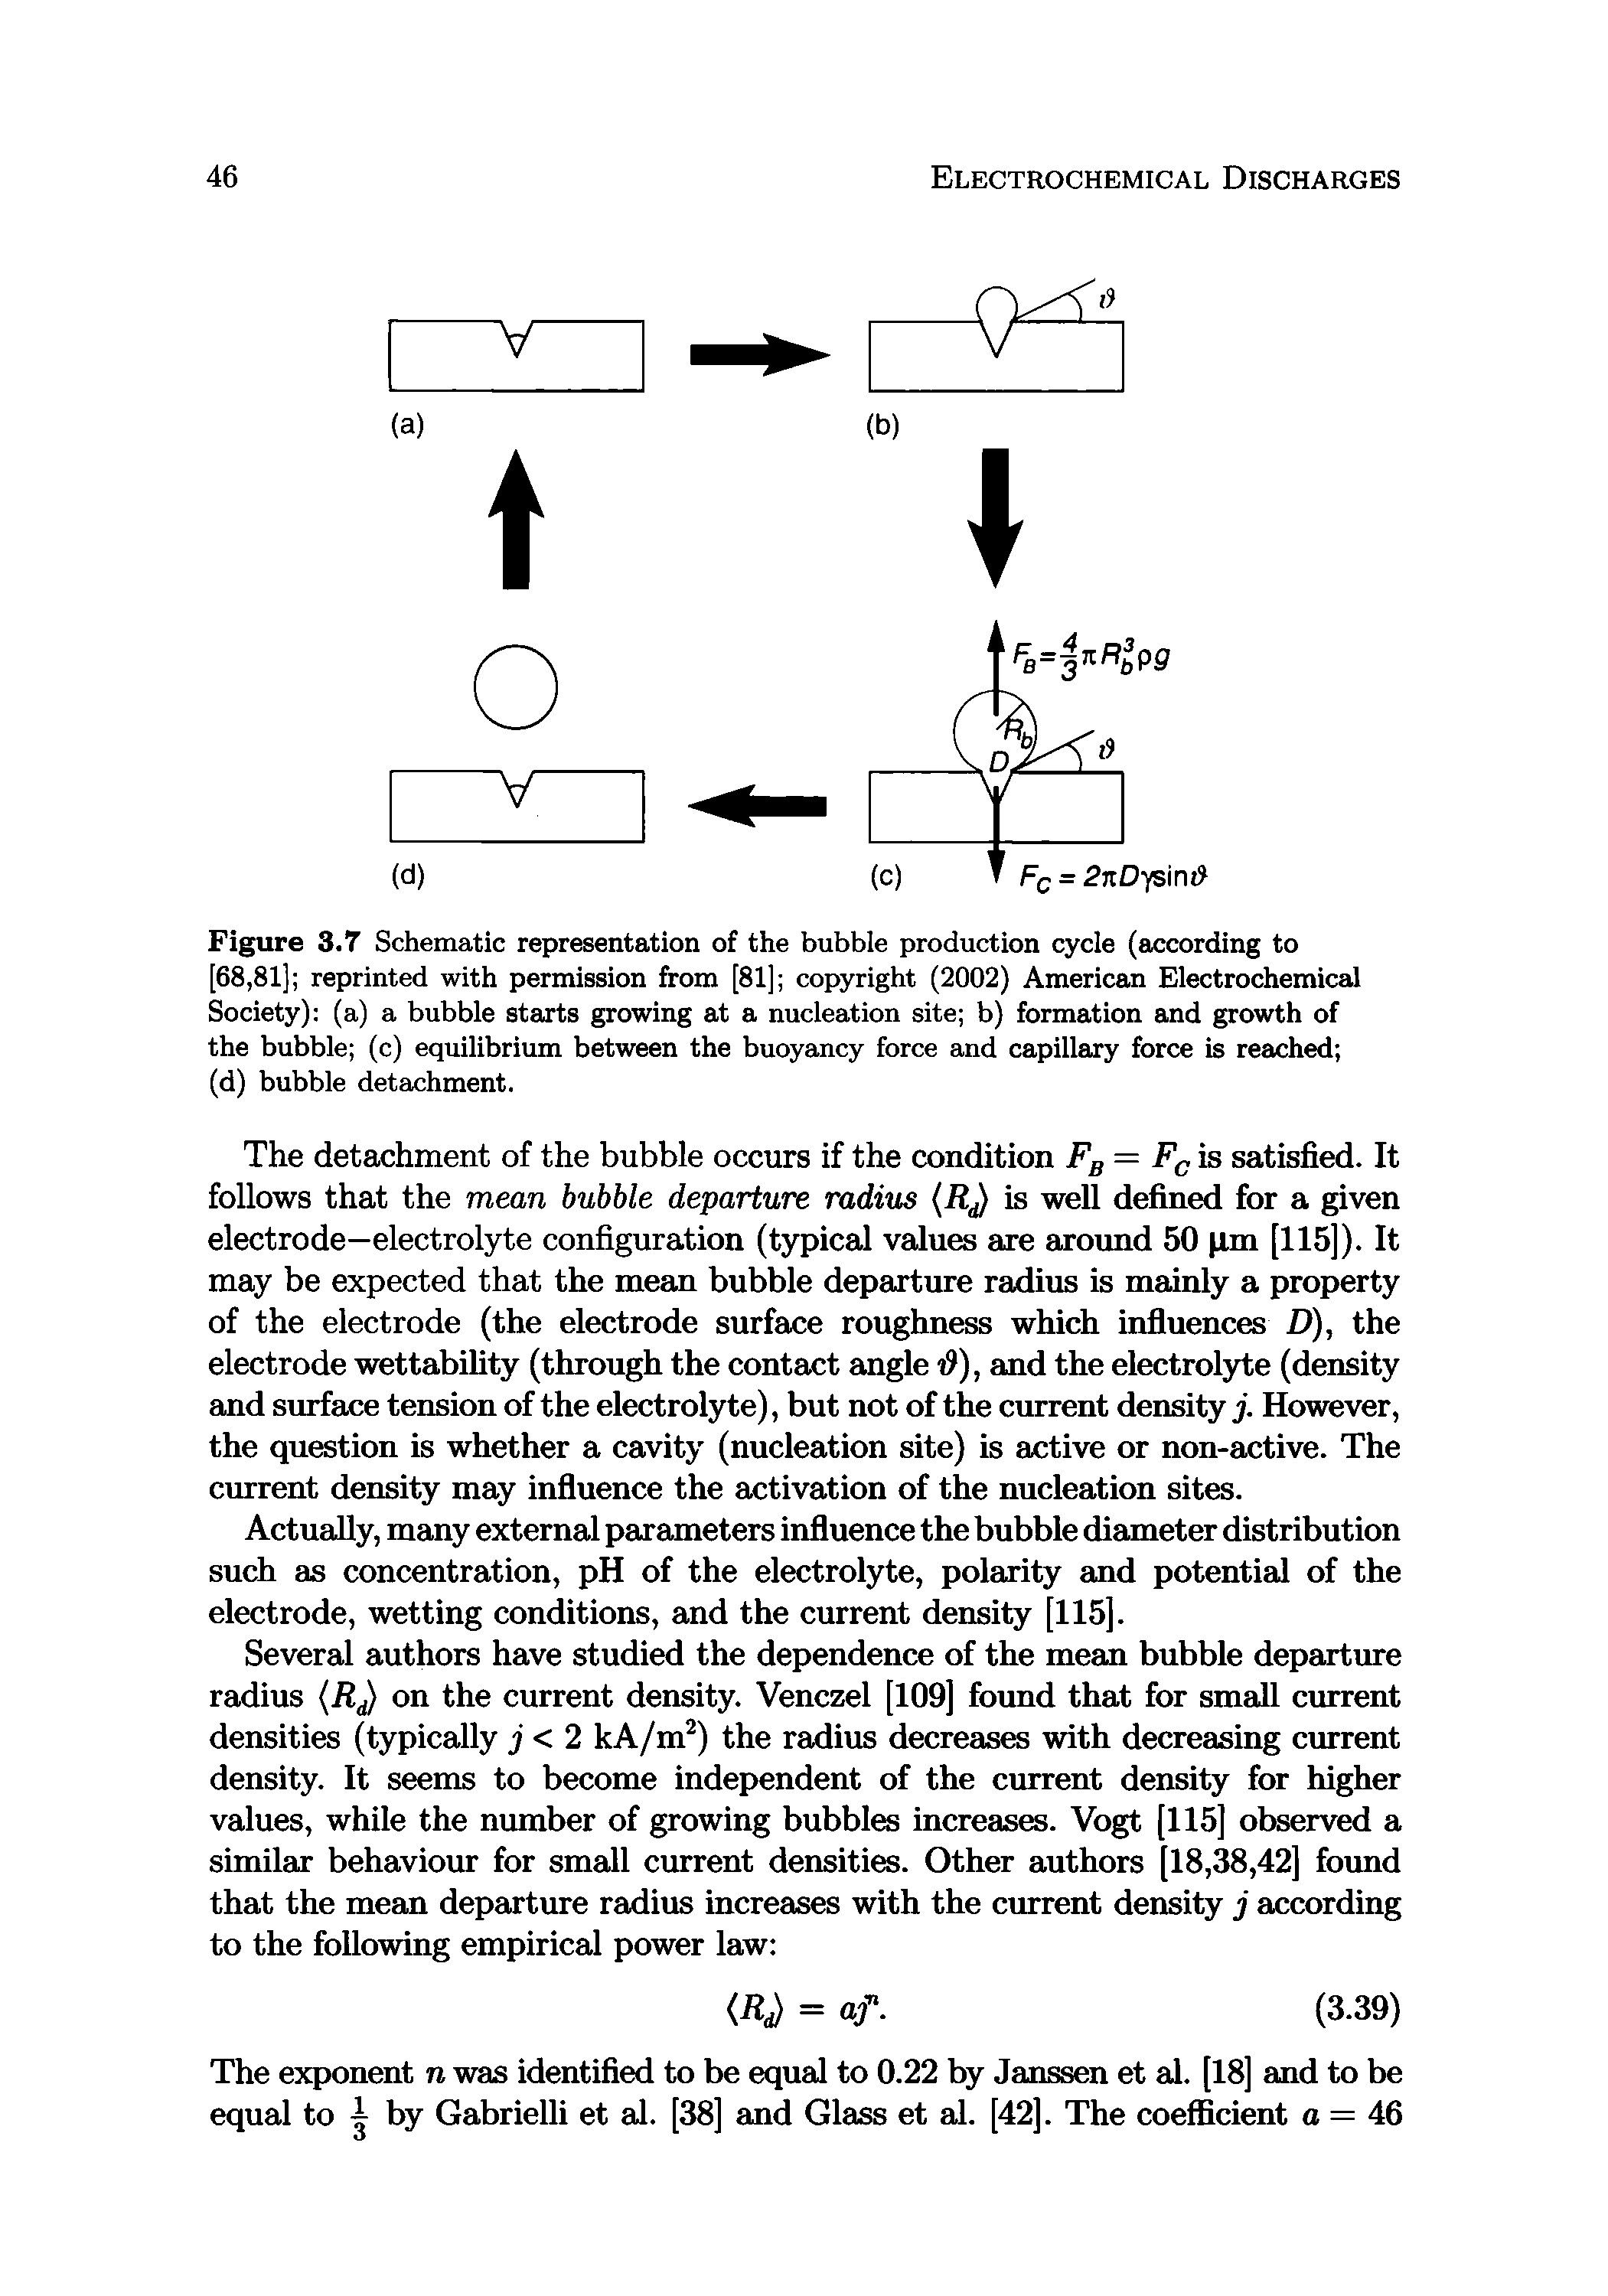 Figure 3.7 Schematic representation of the bubble production cycle (according to [68,81] reprinted with permission from [81] copyright (2002) American Electrochemical Society) (a) a bubble starts growing at a nucleation site b) formation and growth of the bubble (c) equilibrium between the buoyancy force and capillary force is reached (d) bubble detachment.